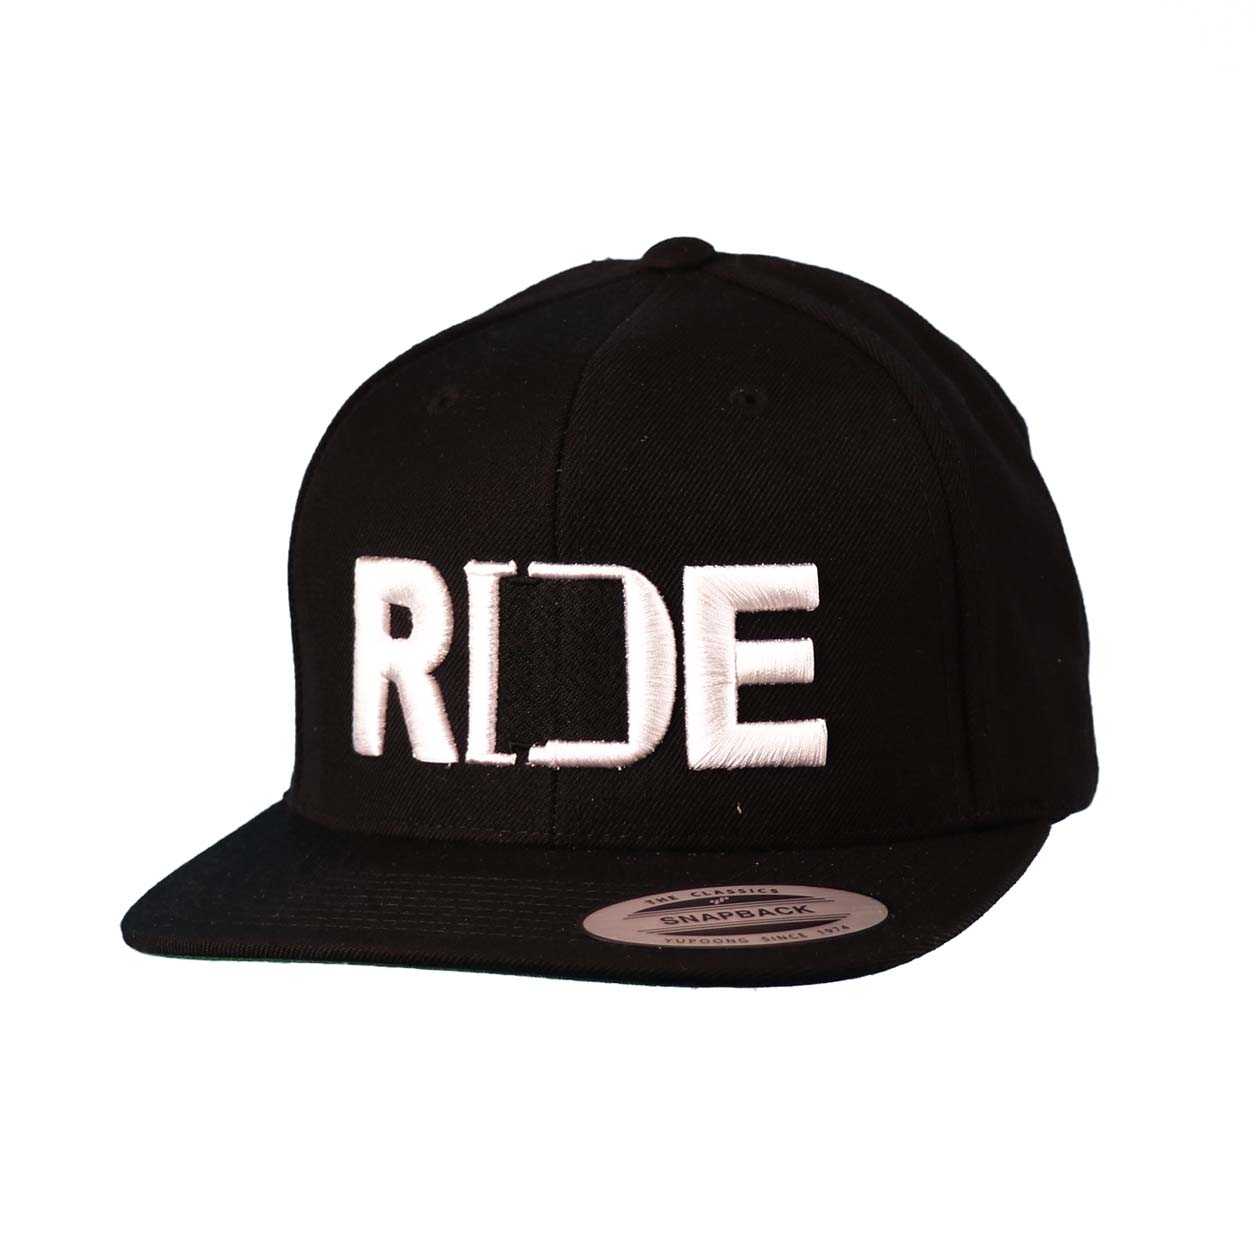 Ride New Mexico Classic Pro 3D Puff Embroidered Snapback Flat Brim Hat Black